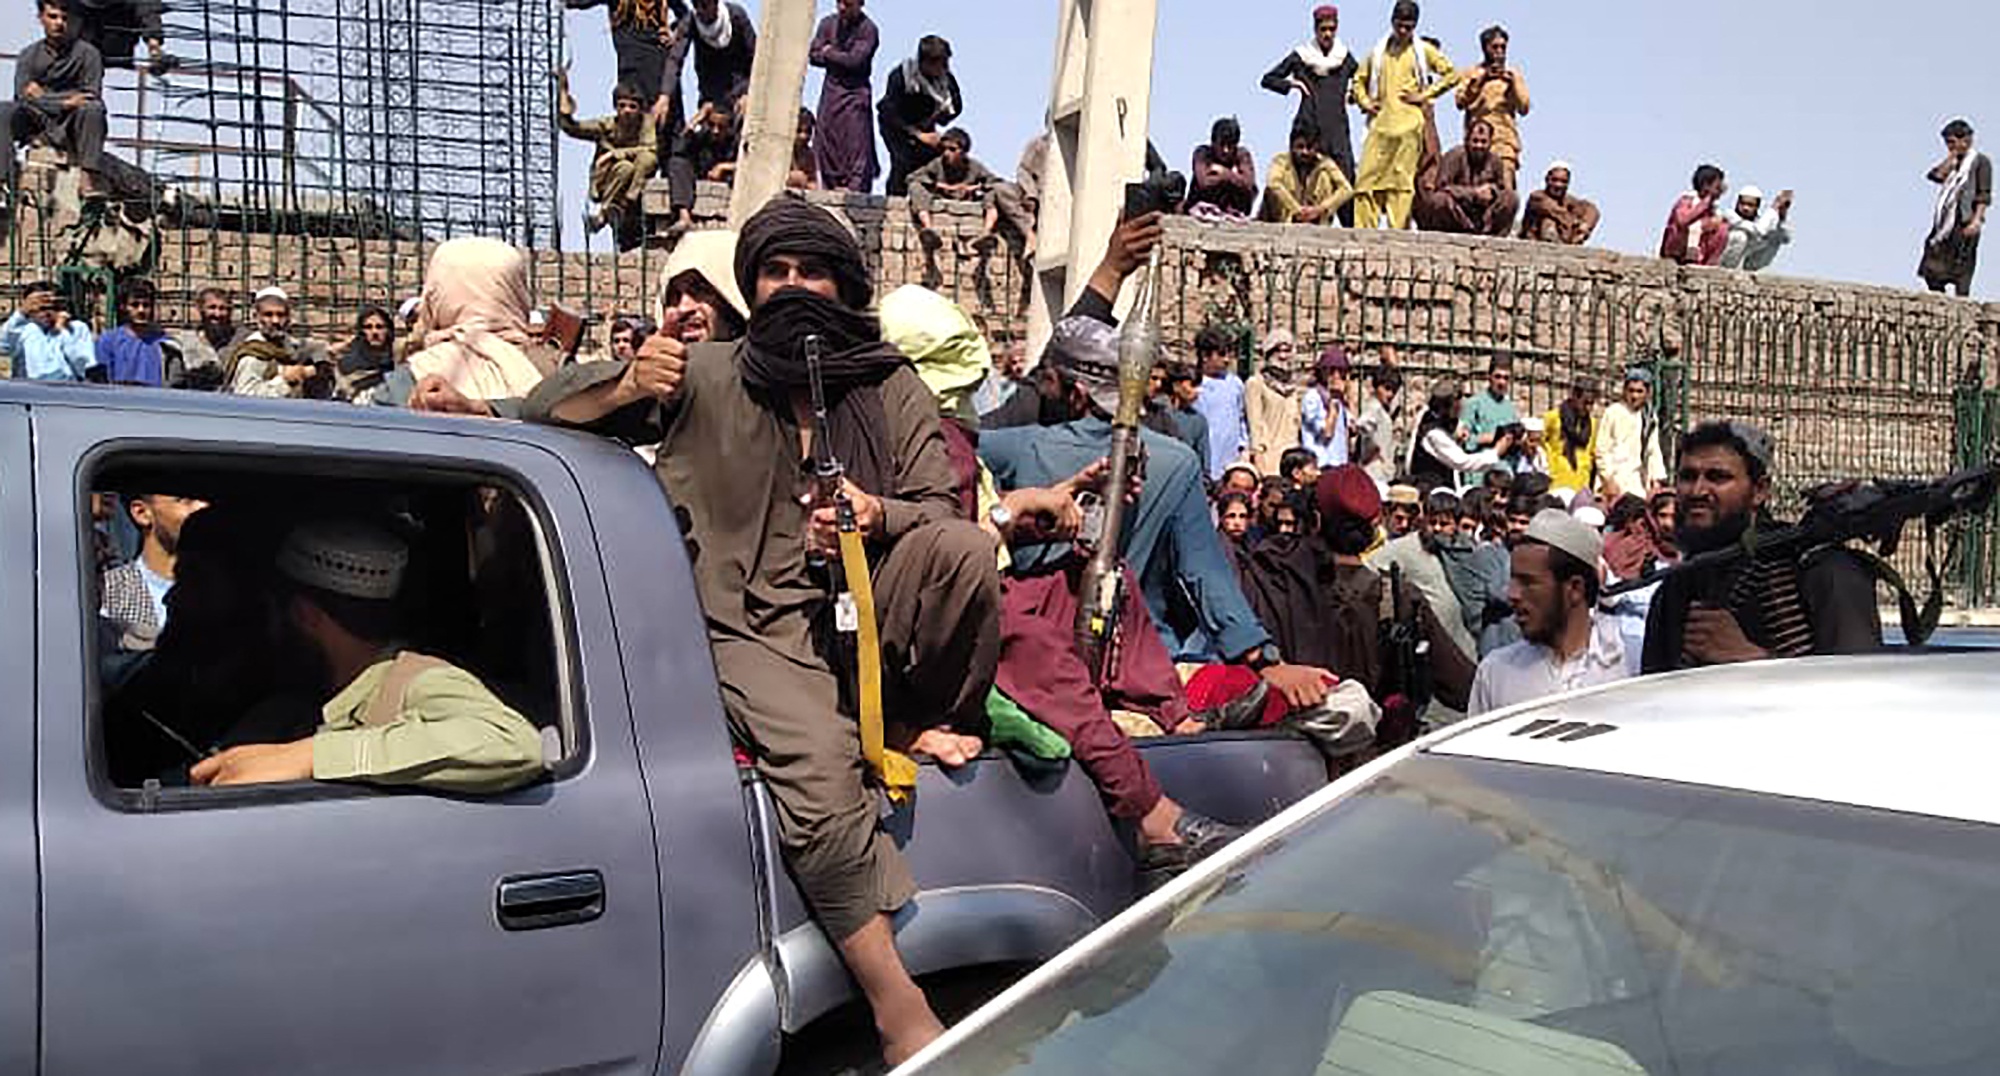 Taliban fighters in Jalalabad province on Aug. 15.